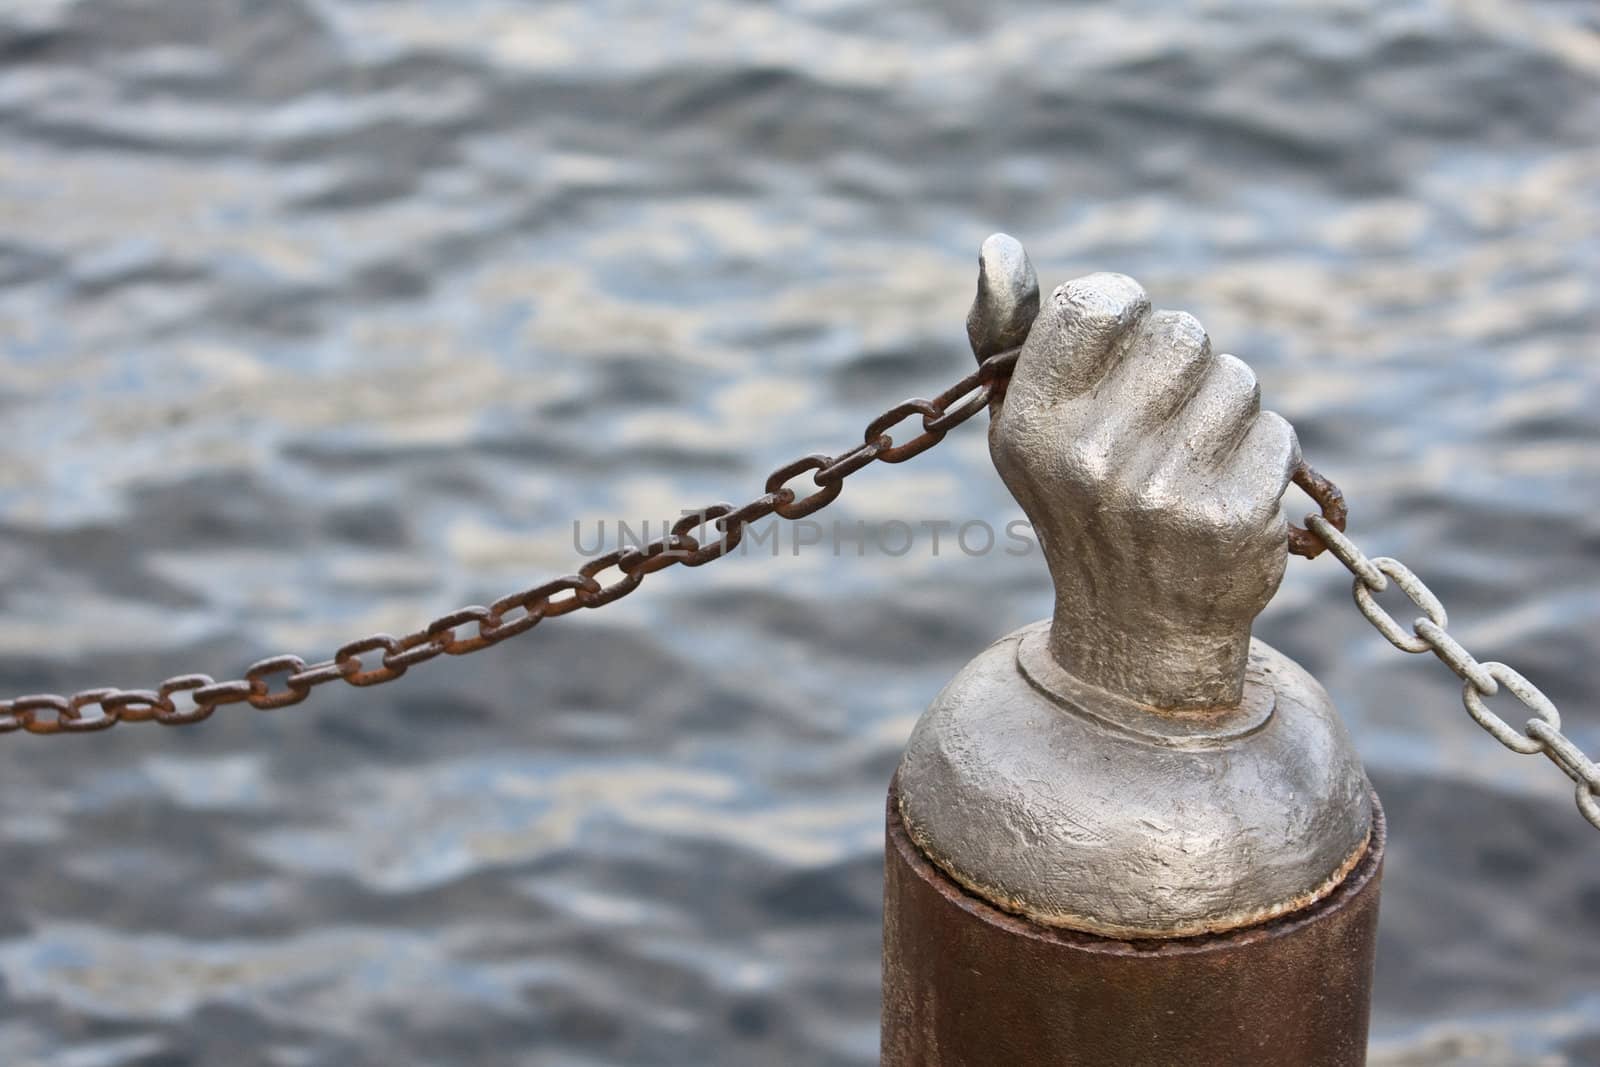 Steel hand holding chain against the water of a lake or ocean